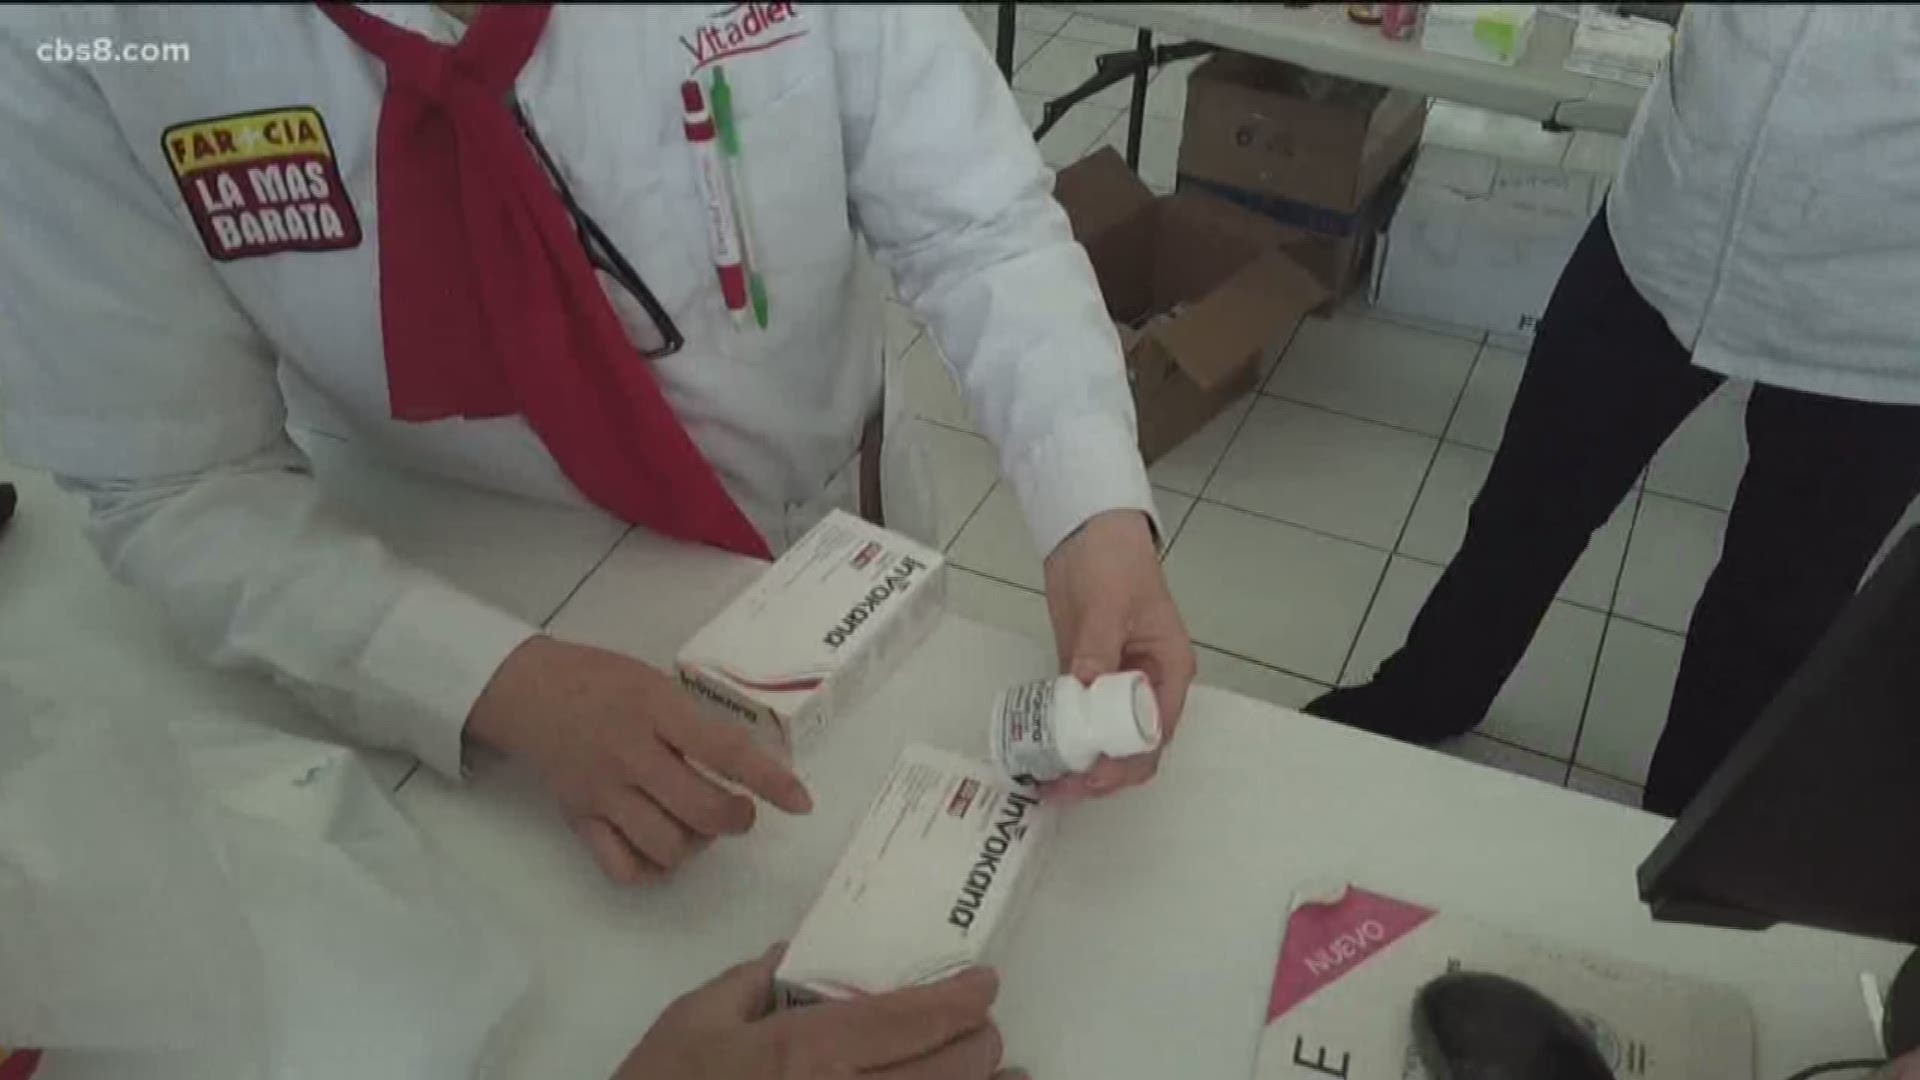 News 8 traveled beyond the border with a hidden camera to check out pharmacies in Tijuana.